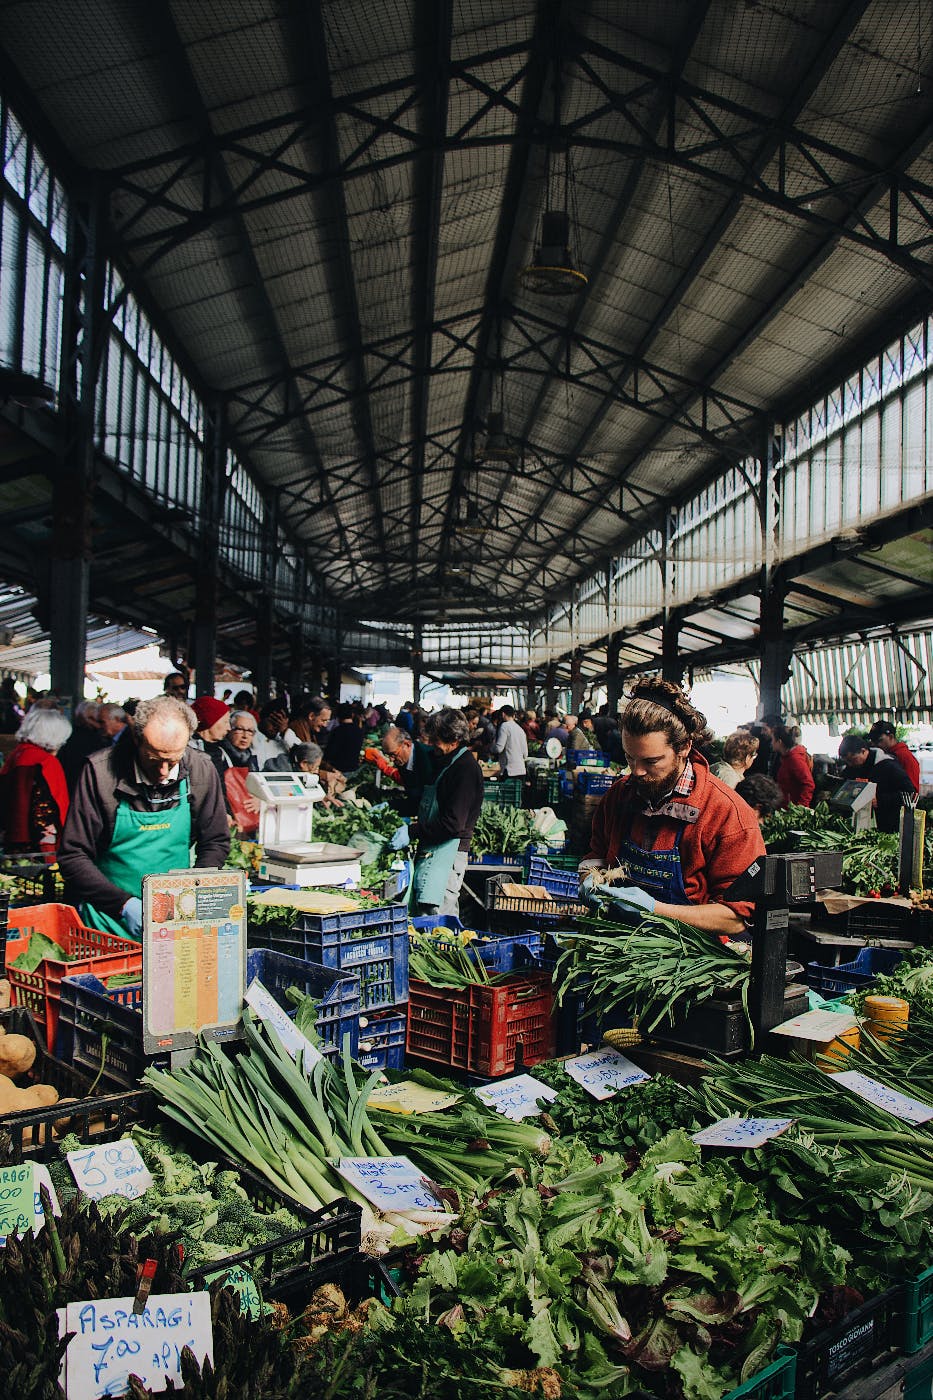 a crowded maketplace with vegetables in the foreground